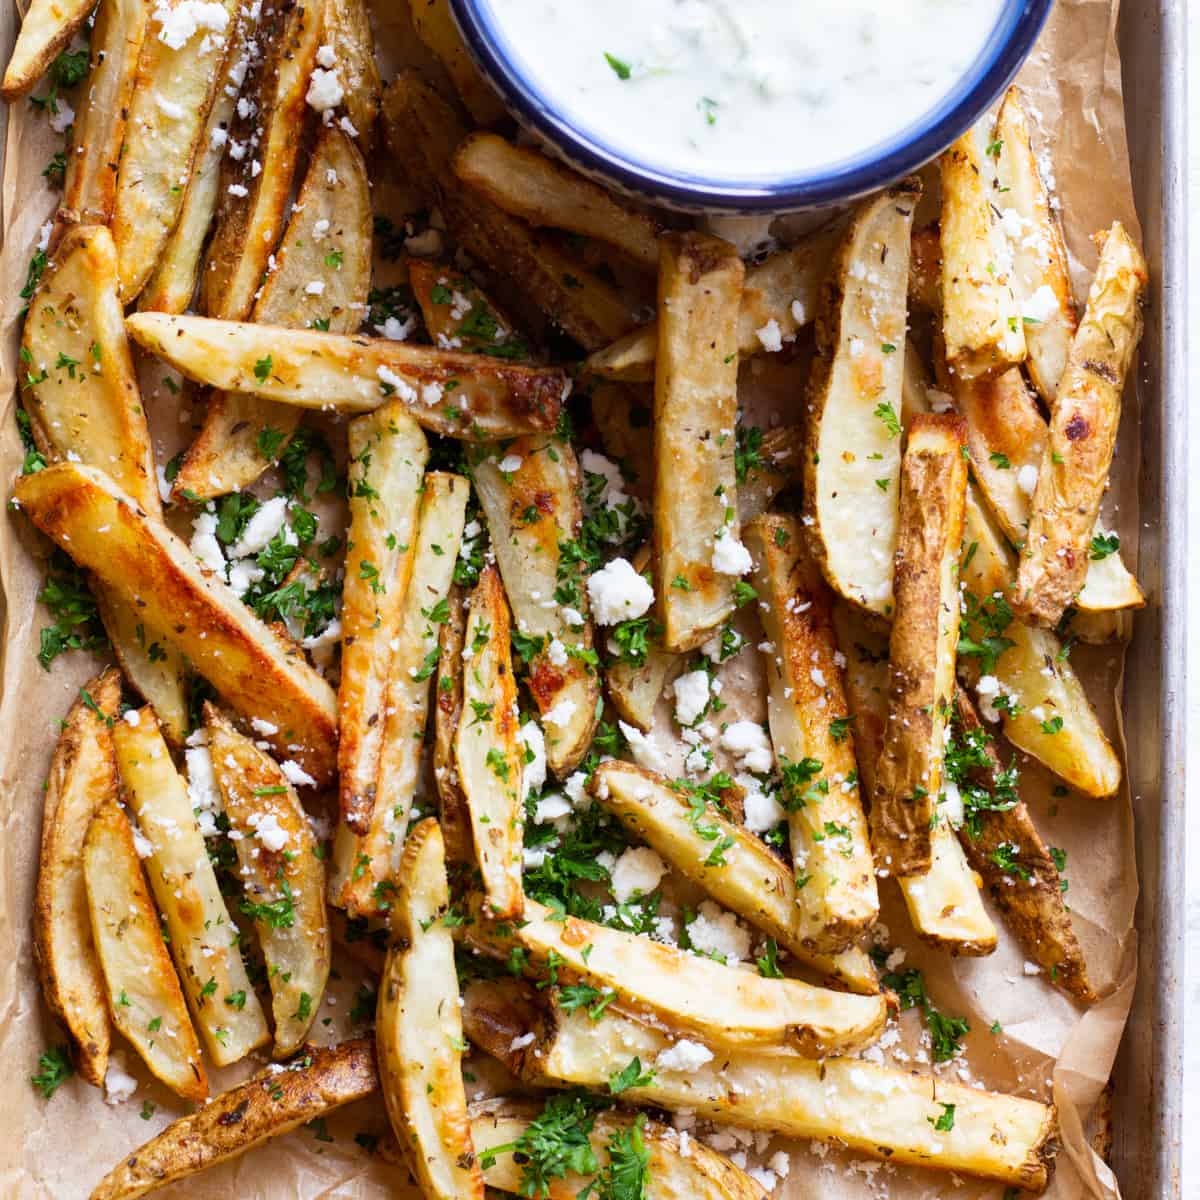 These oven baked fries are crispy on the outside and tender on the inside. They're topped with feta and served with homemade tzatziki.